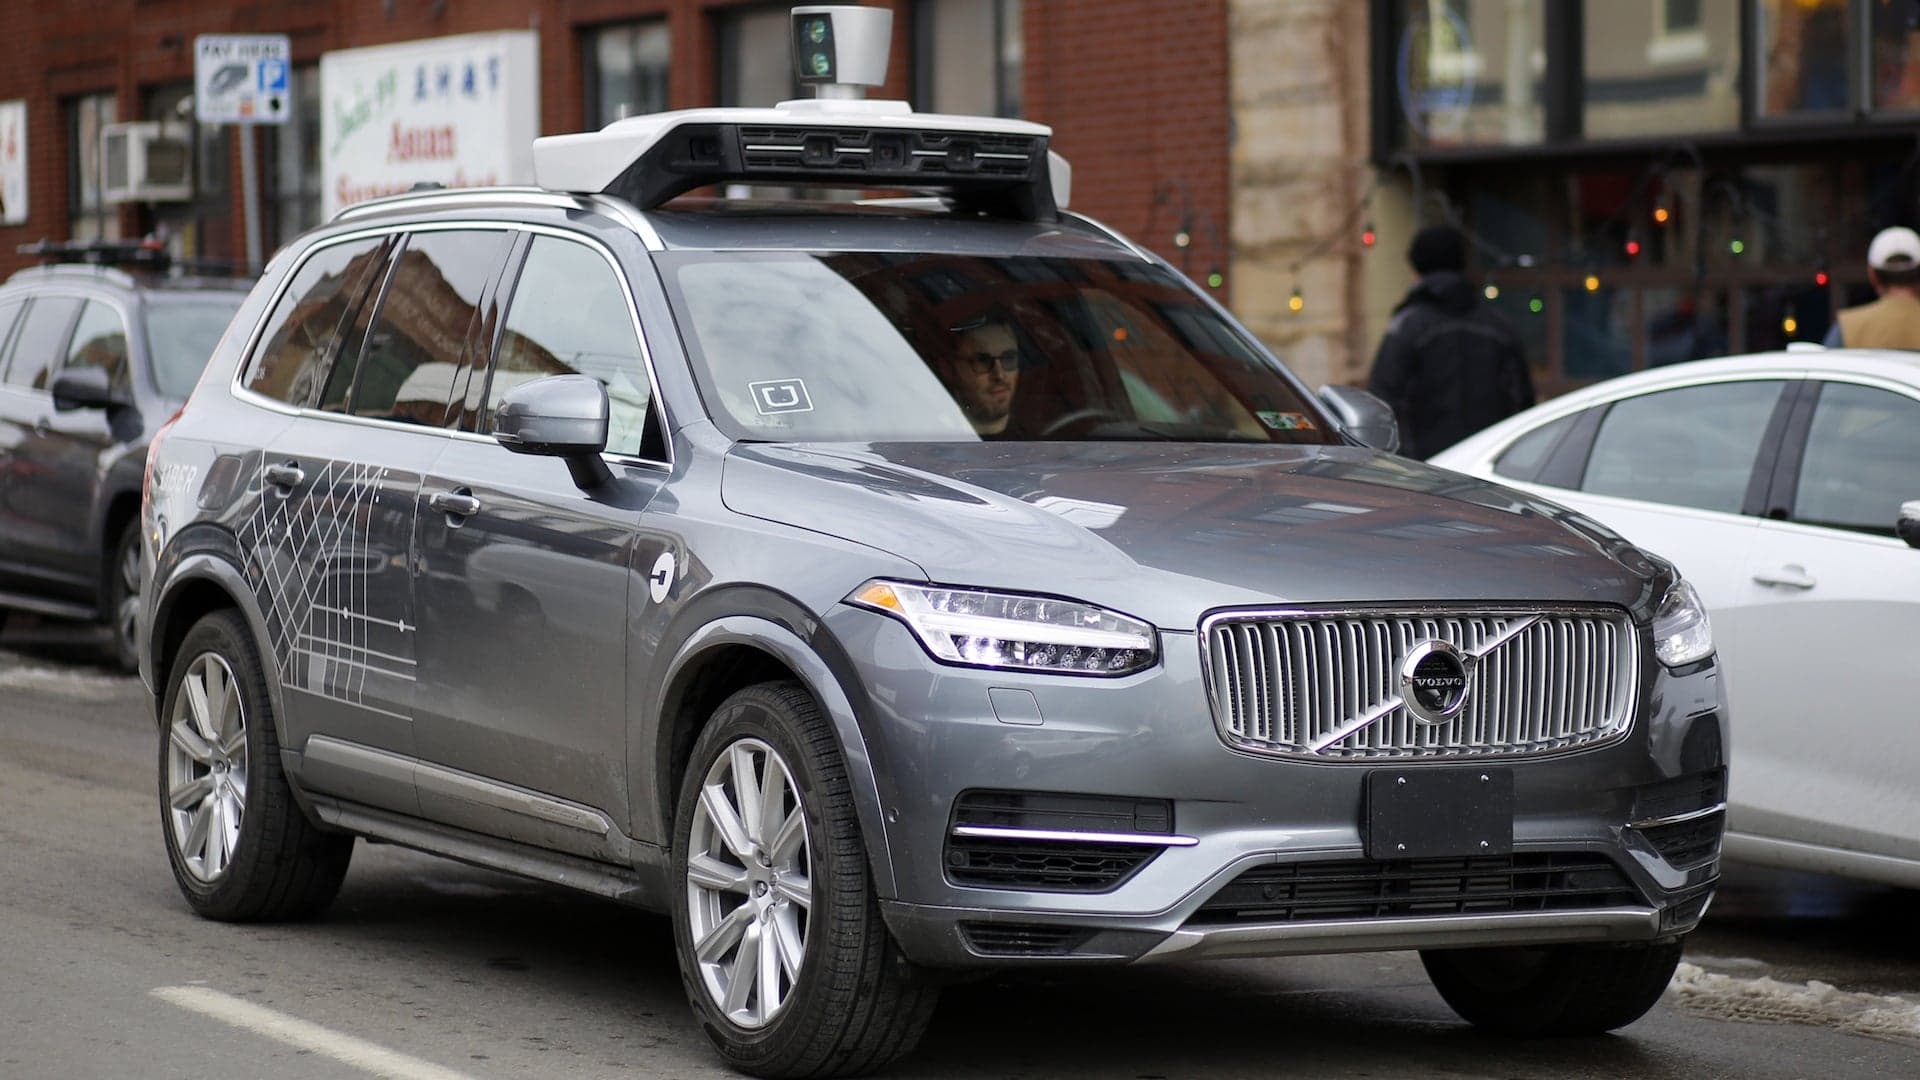 Uber Gets Approval to Bring Autonomous Car Testing Back to California